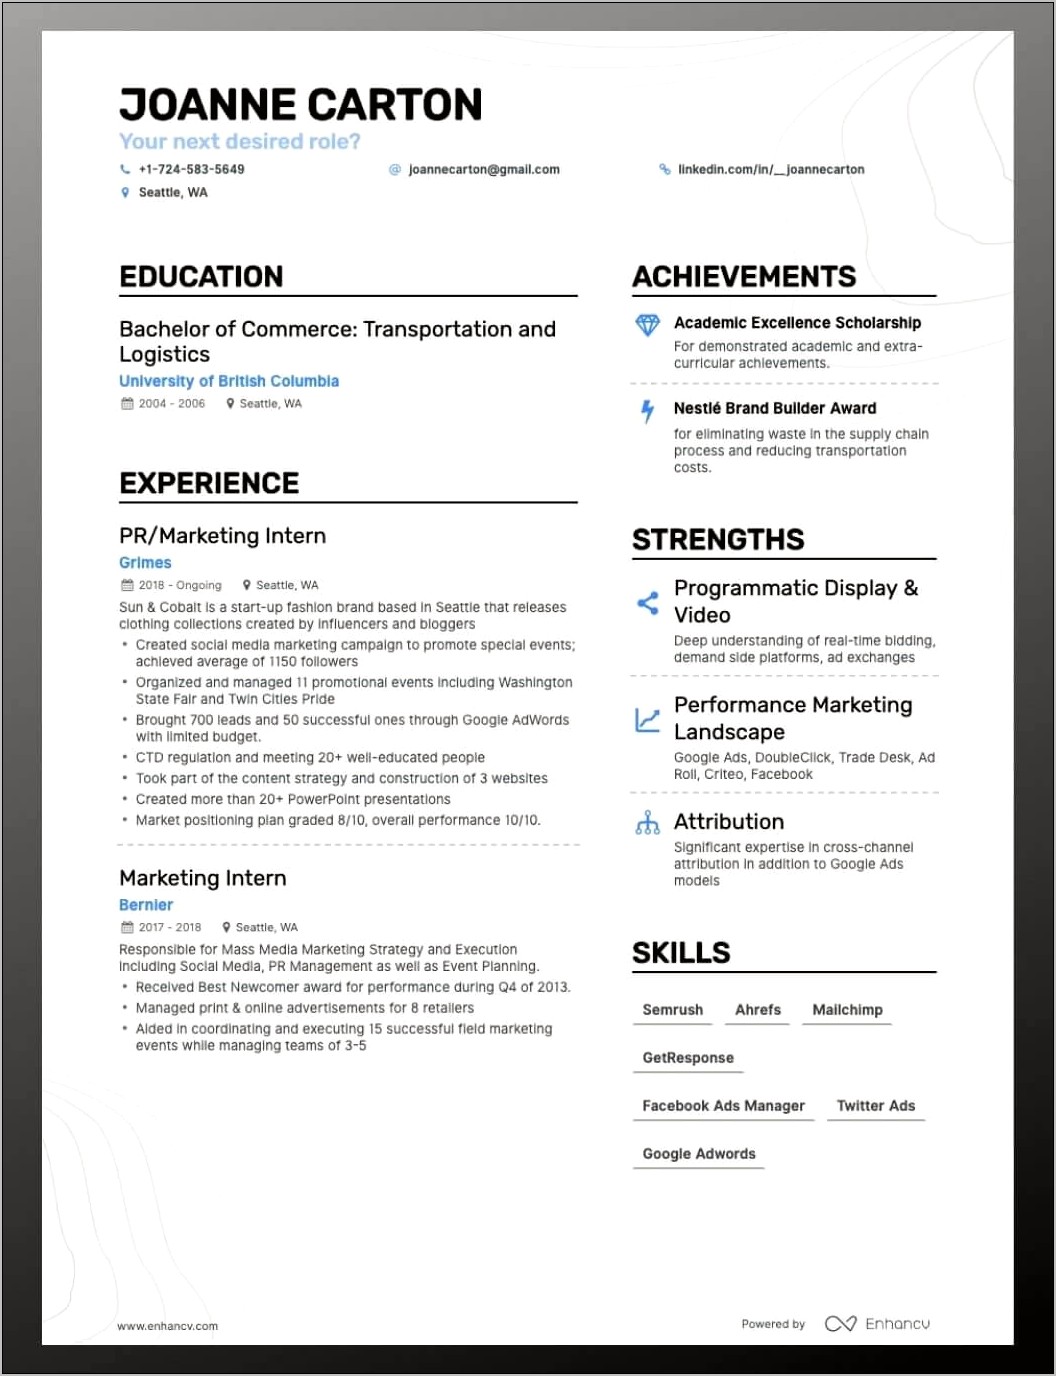 Resume And Two Most Recent Experience First